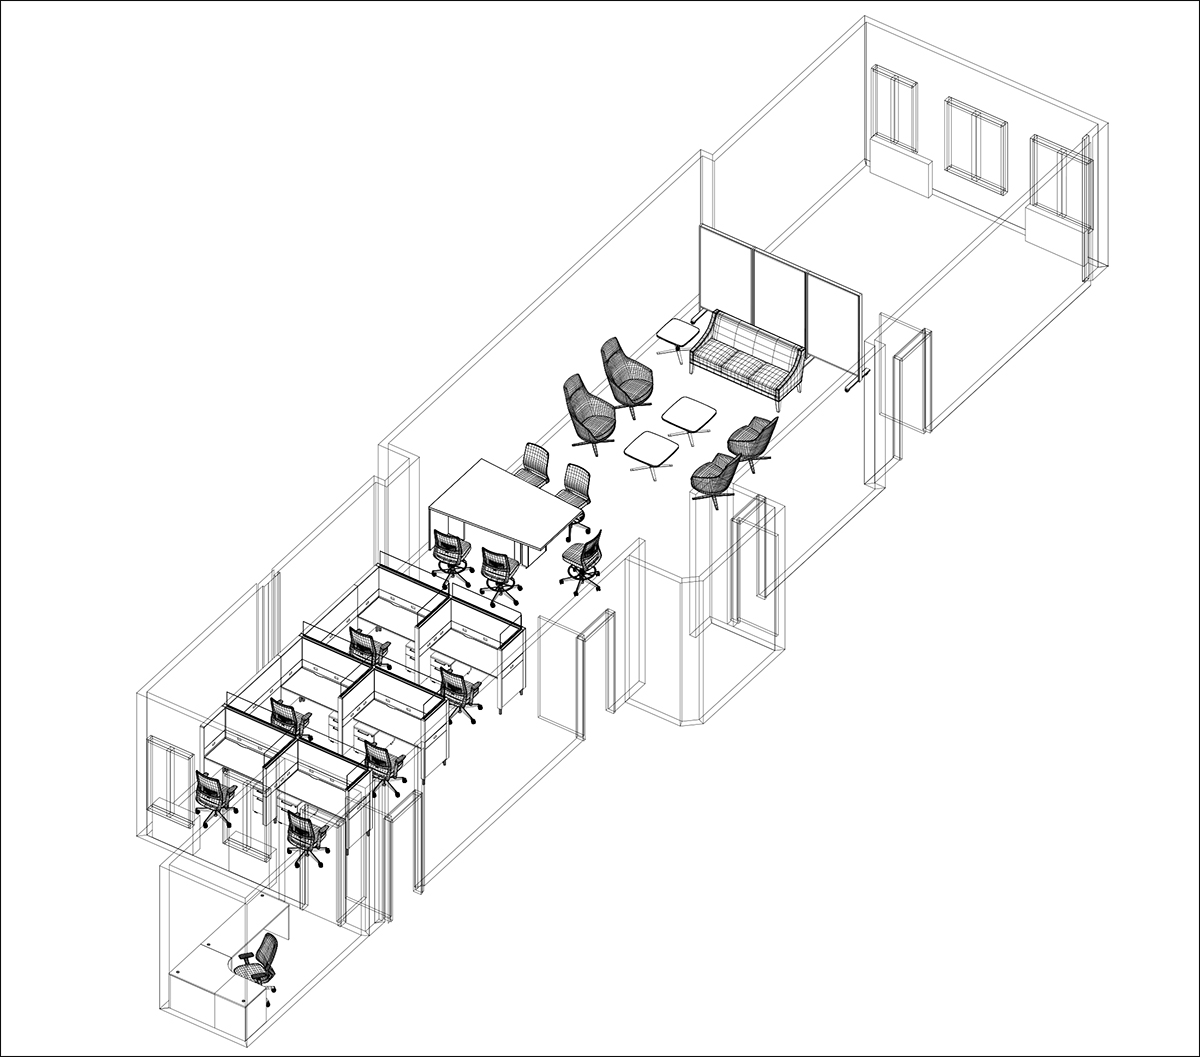 Citadel Firm Space Plans 10-02-20, inside, artist rendering of desks, chairs and more